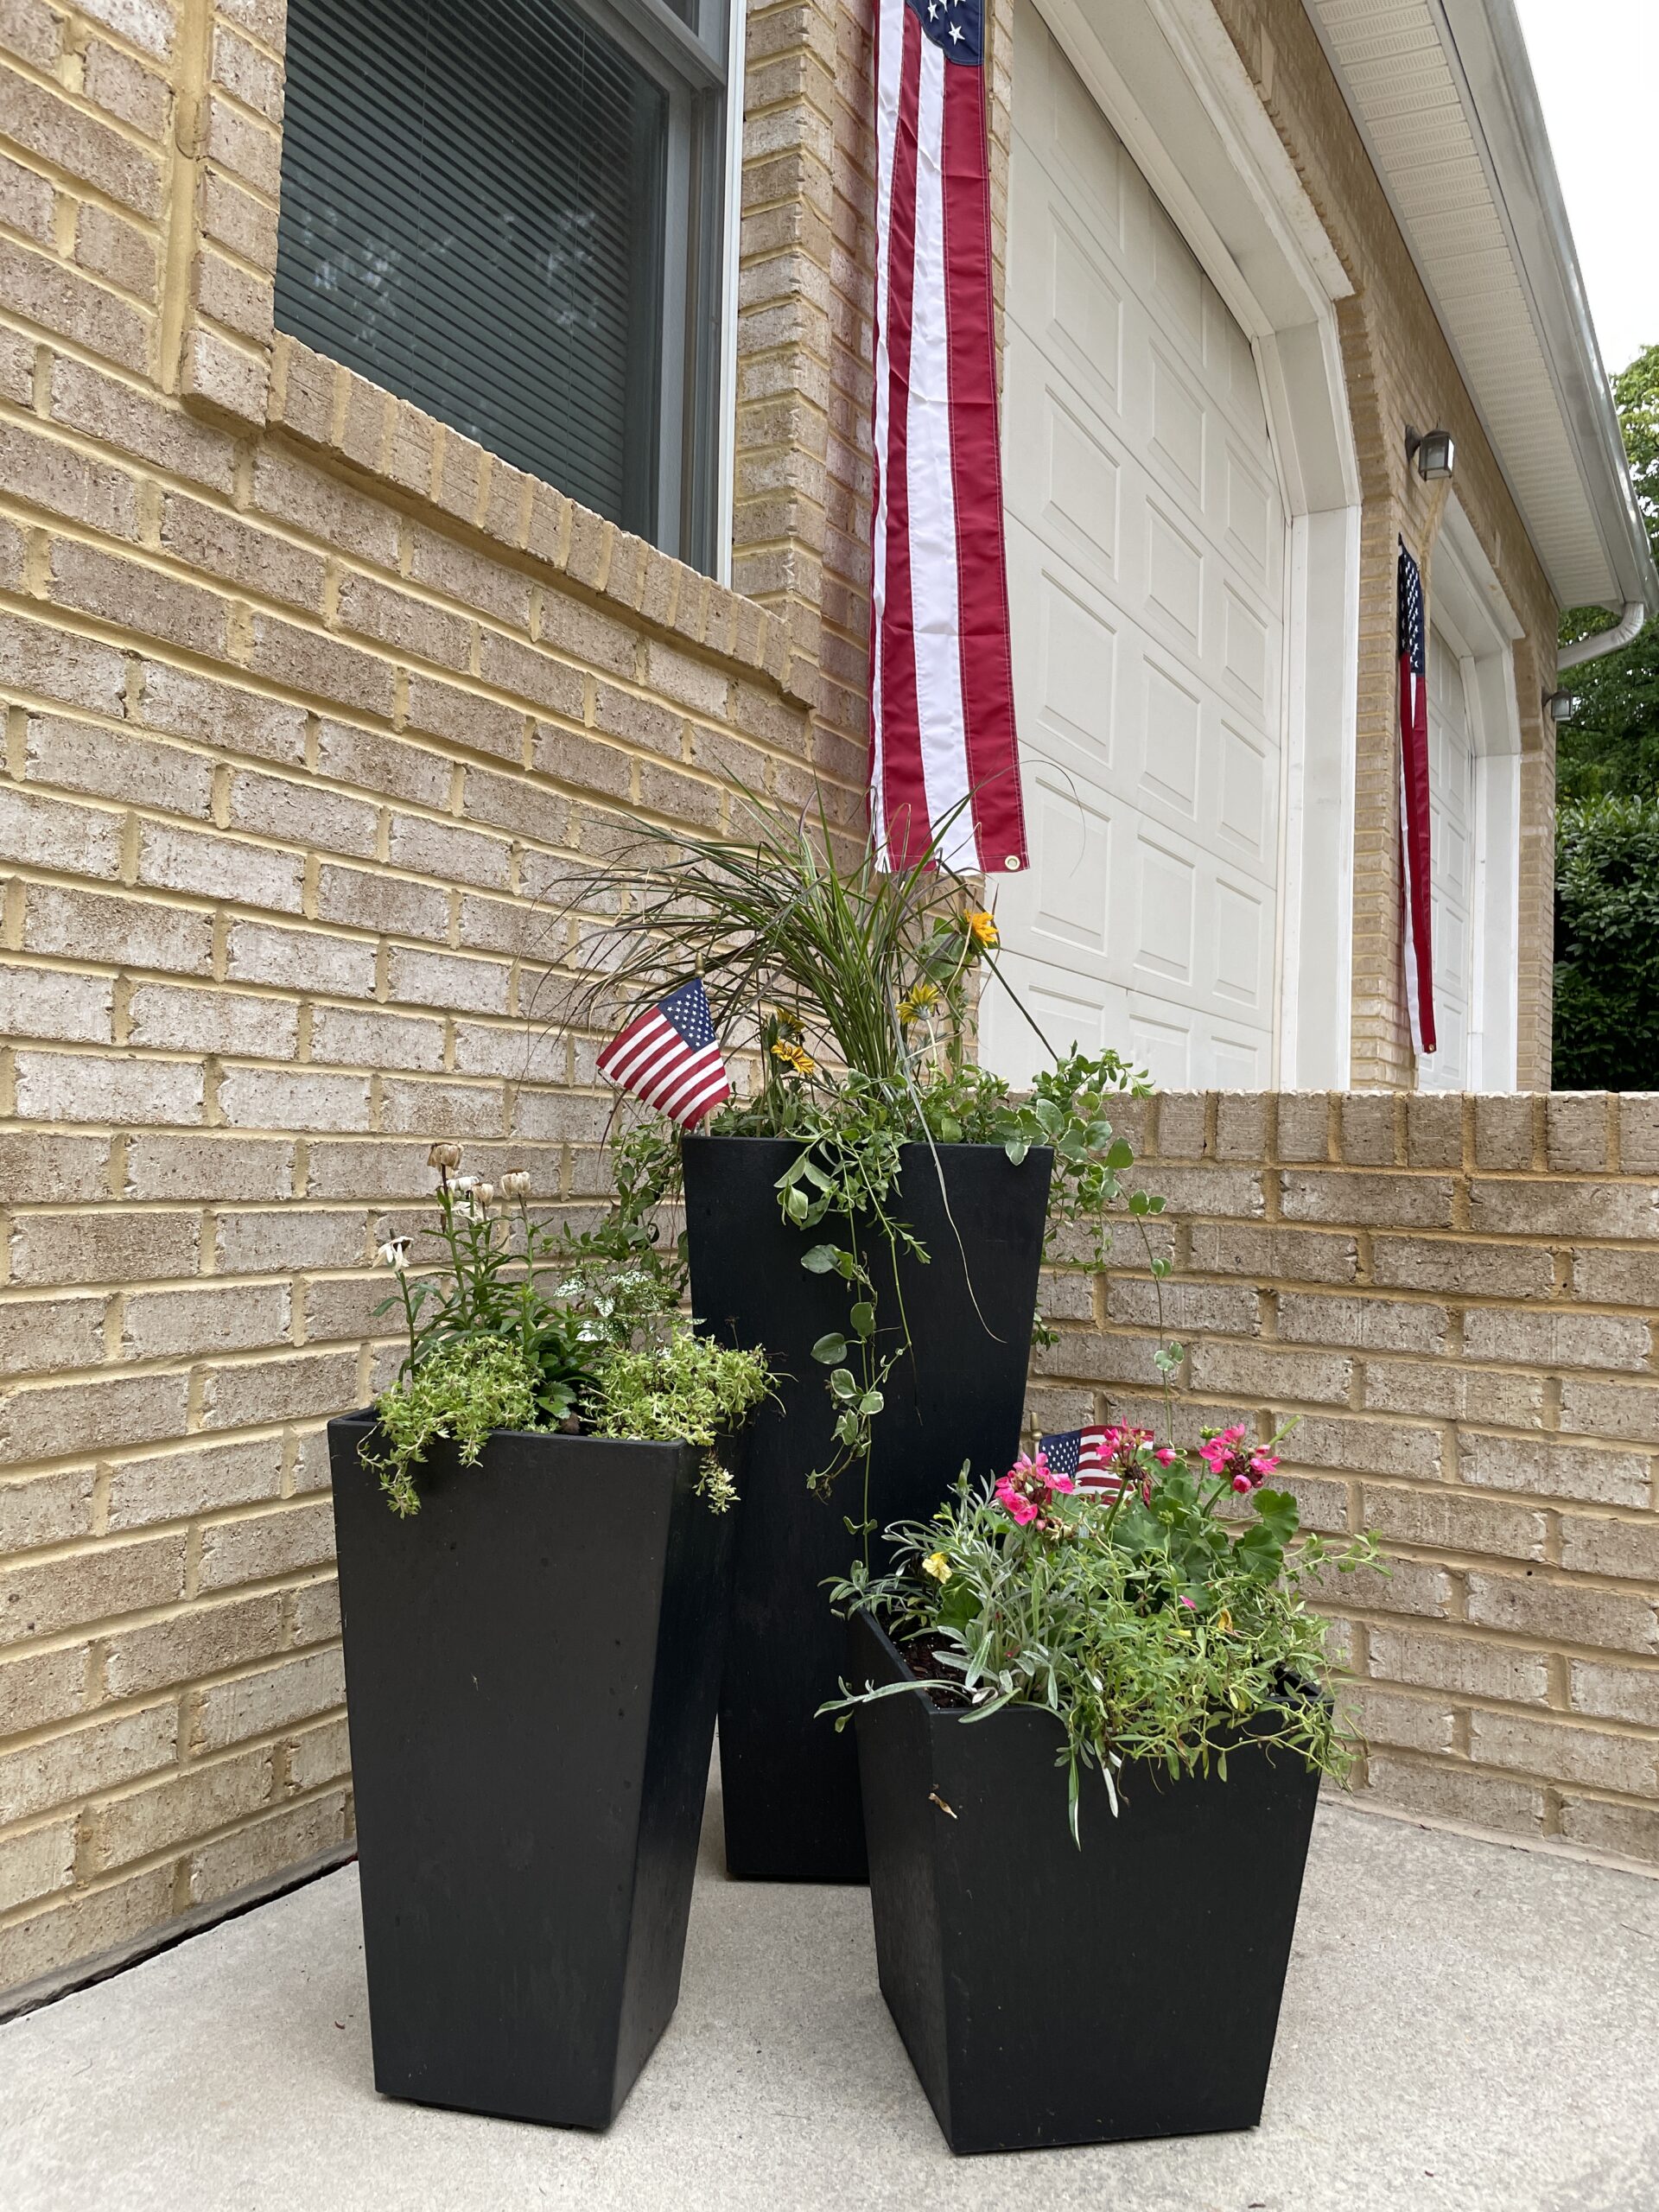 How to Fill Large Planters - Kippi at Home